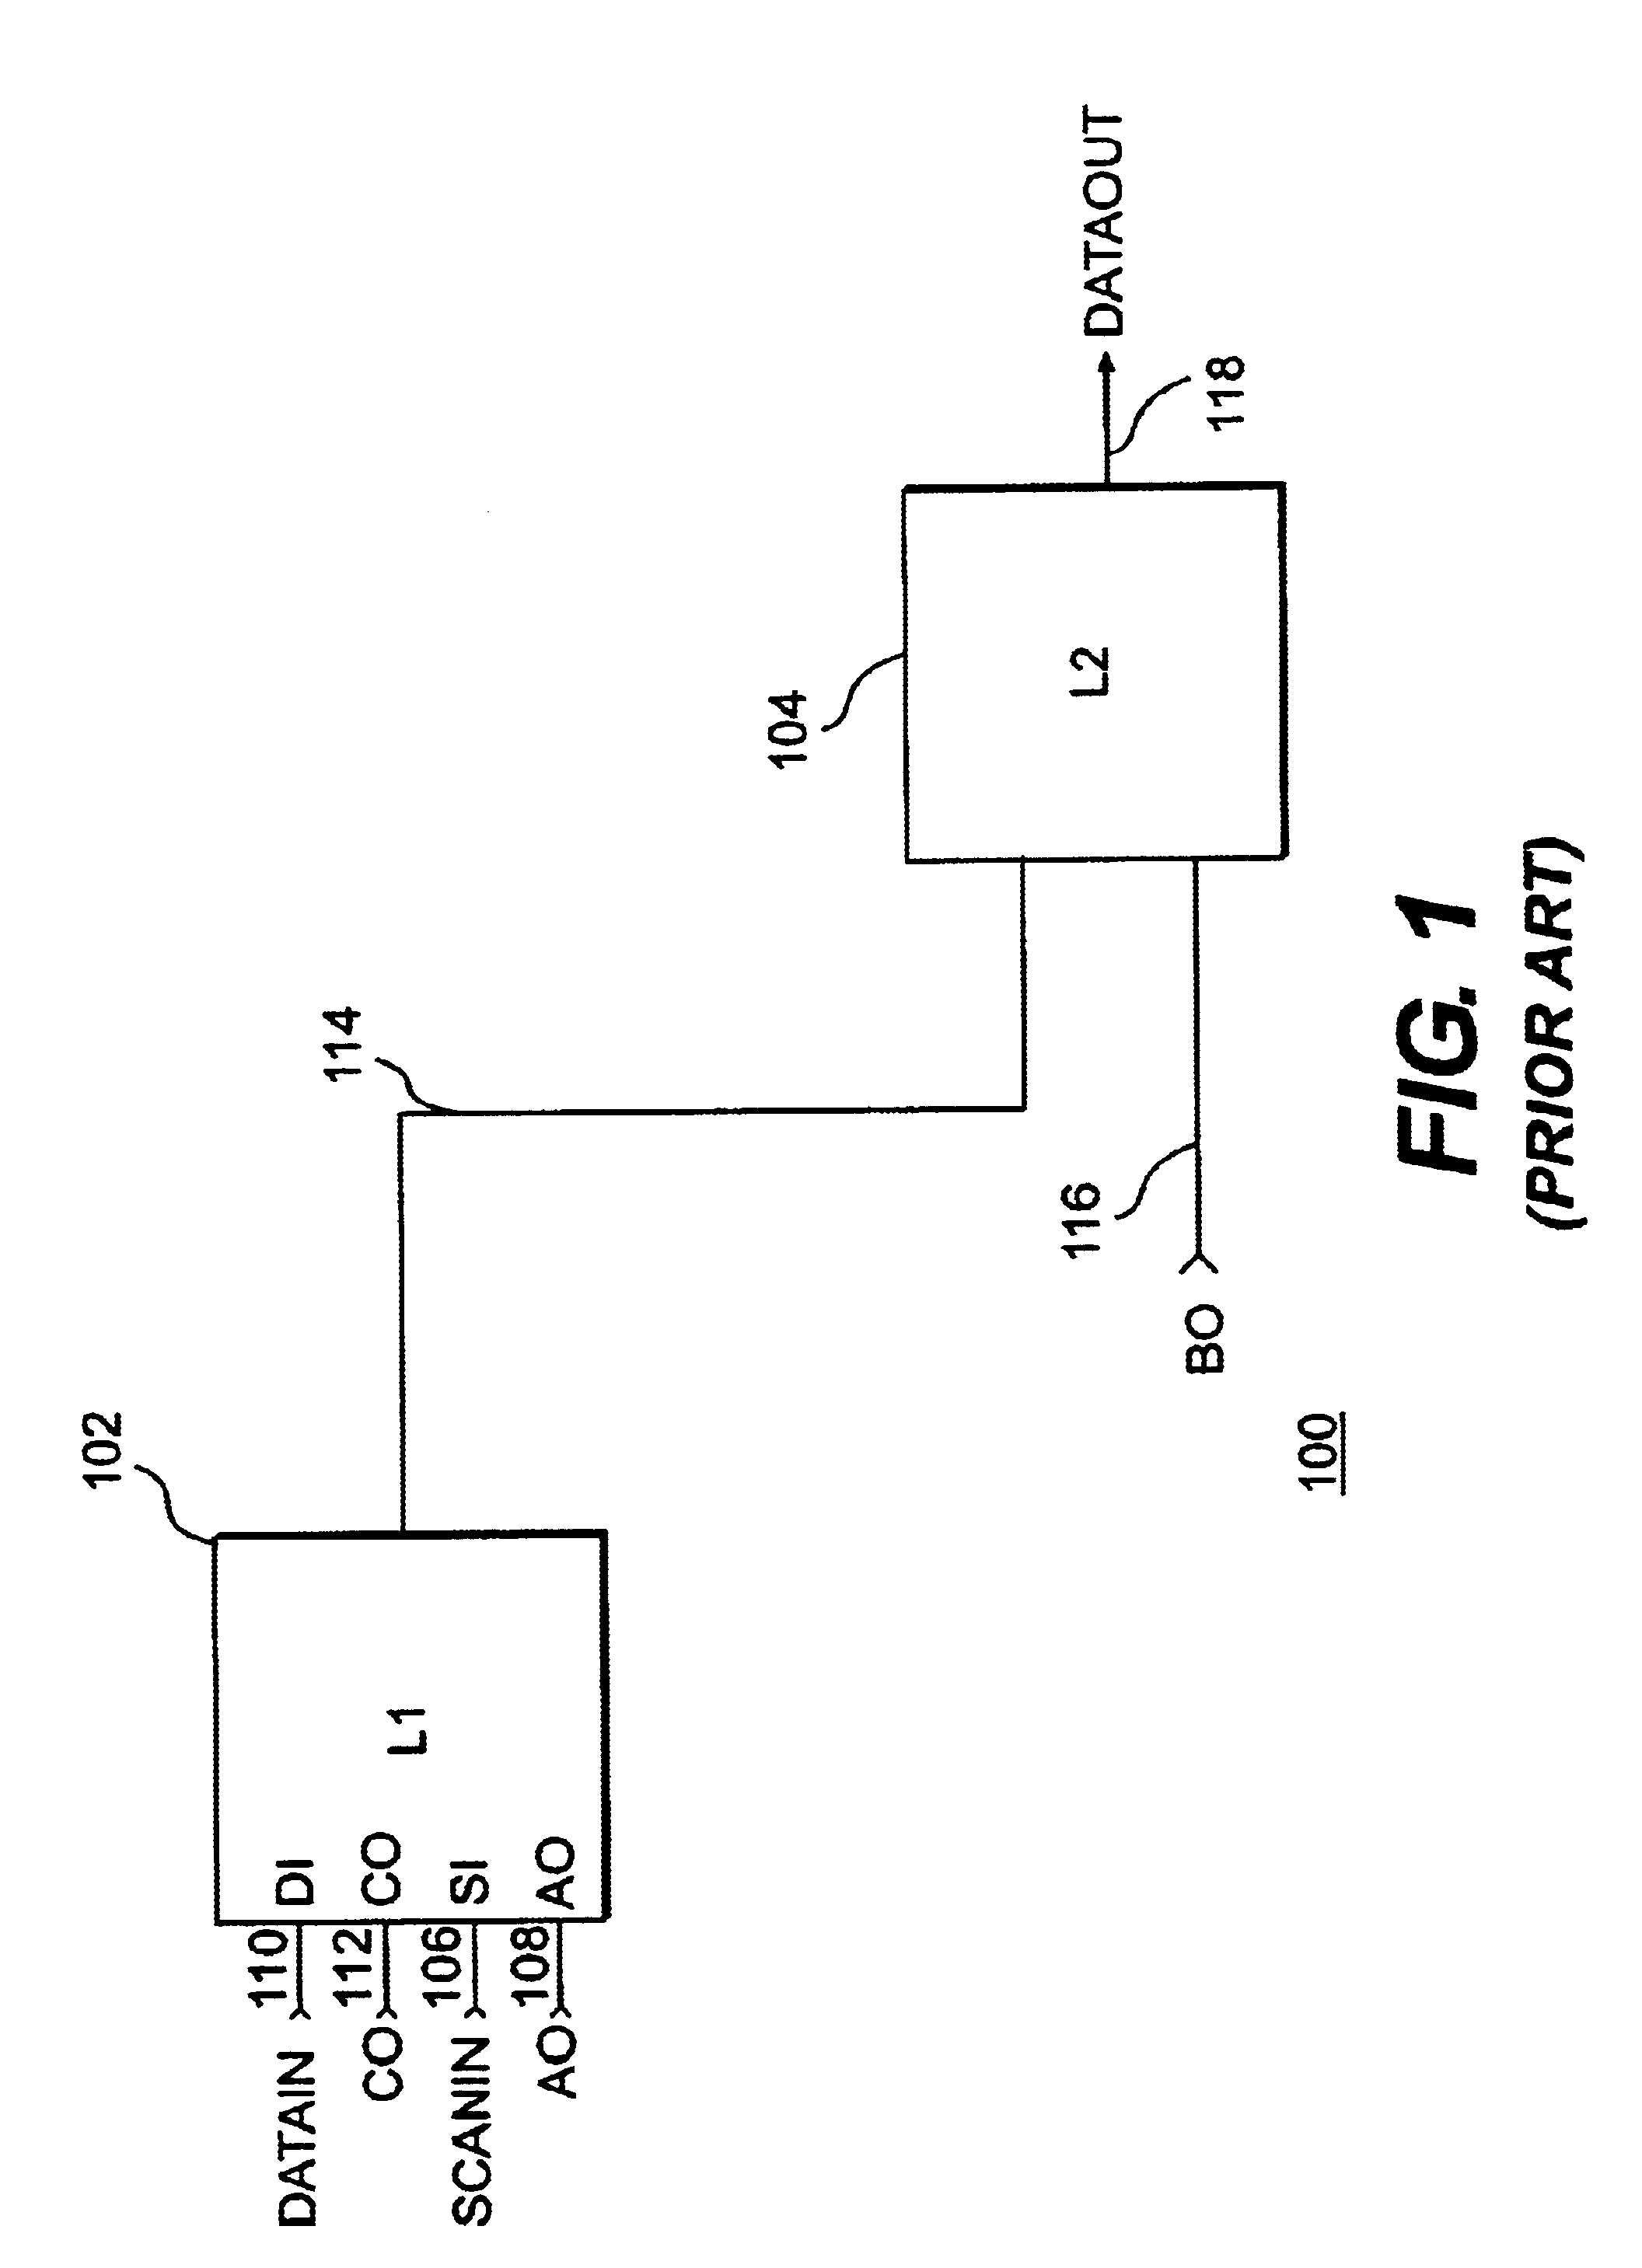 Method and apparatus for a scannable hybrid flip flop